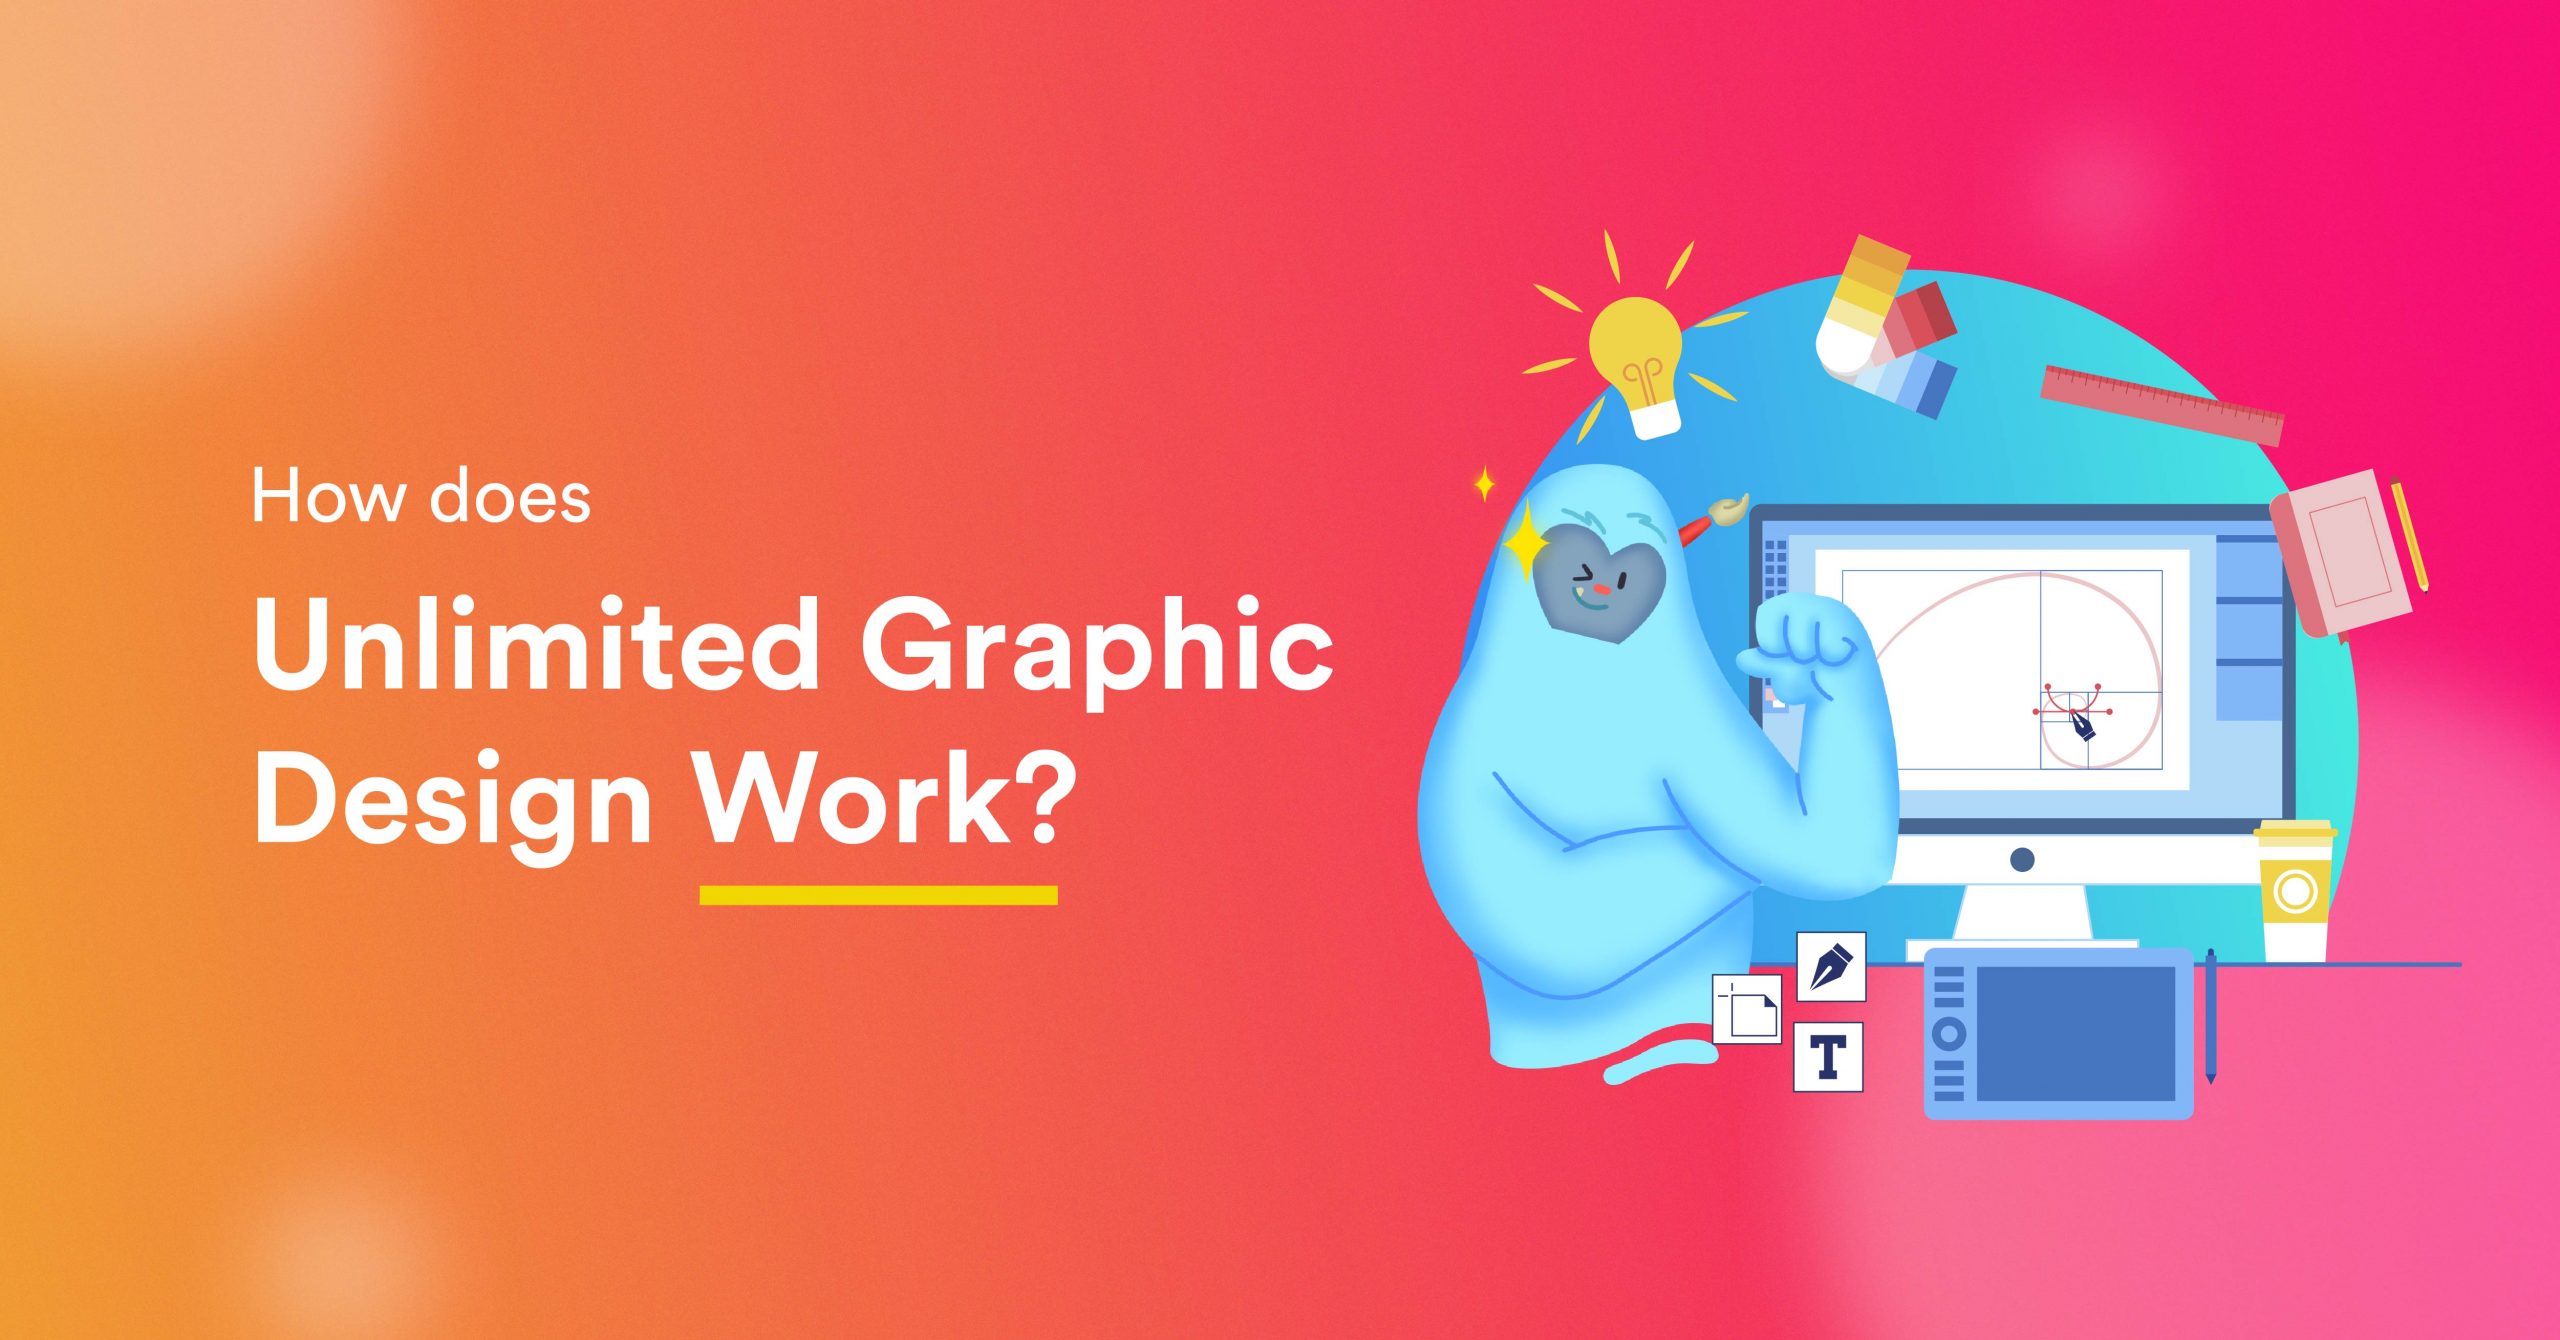 How Does Unlimited Graphic Design Work?